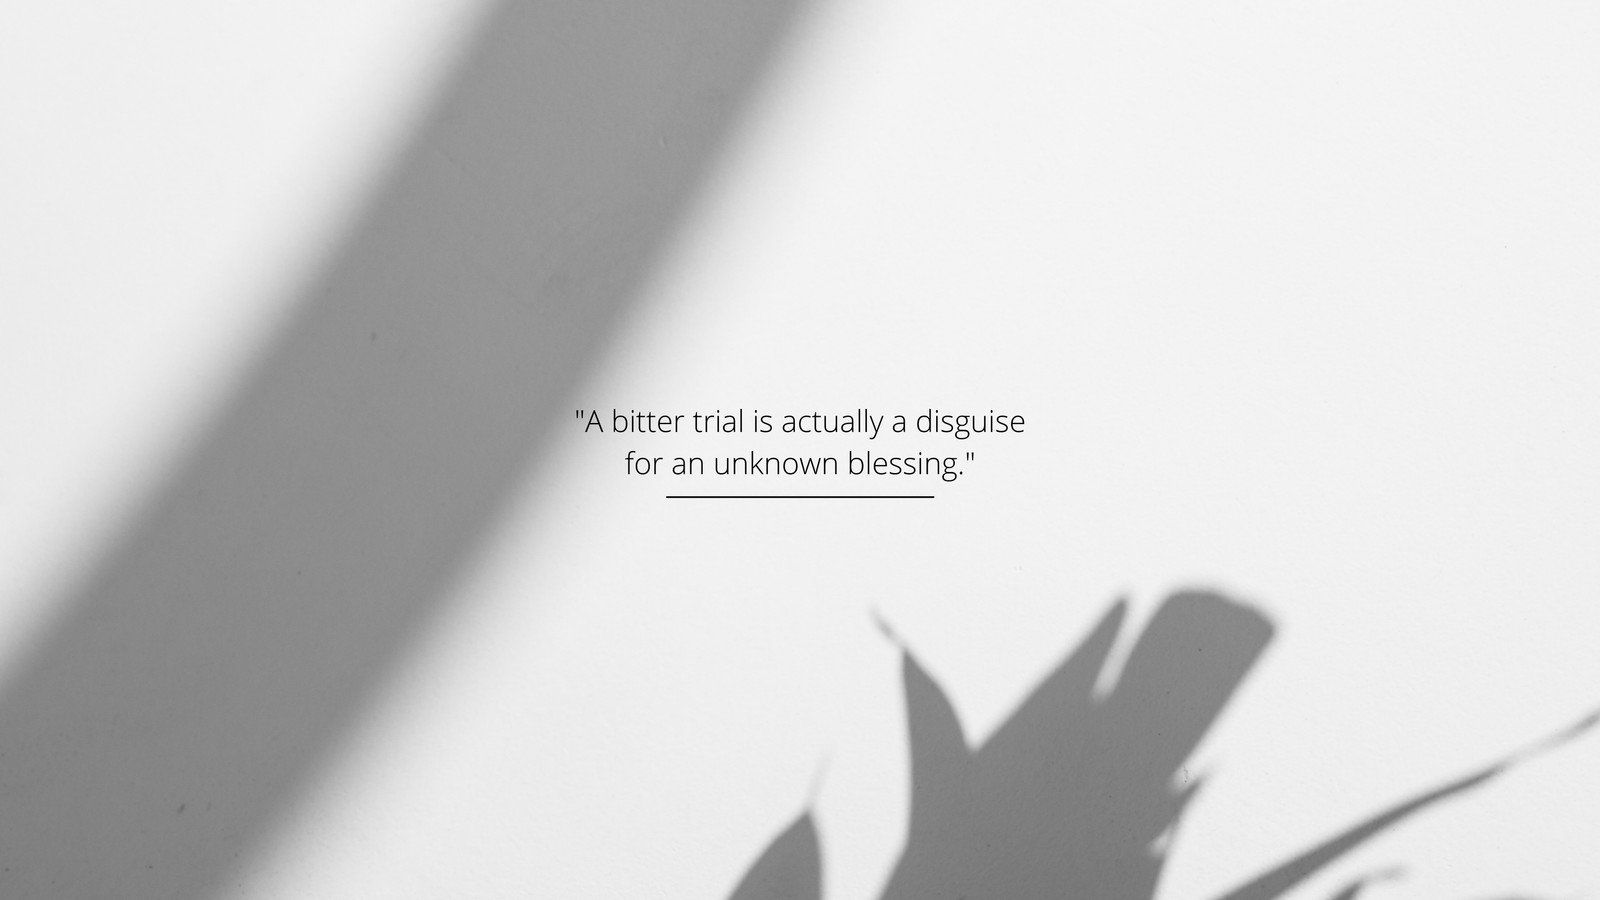 A quote on a white background with a shadow of a plant on the wall - Gray